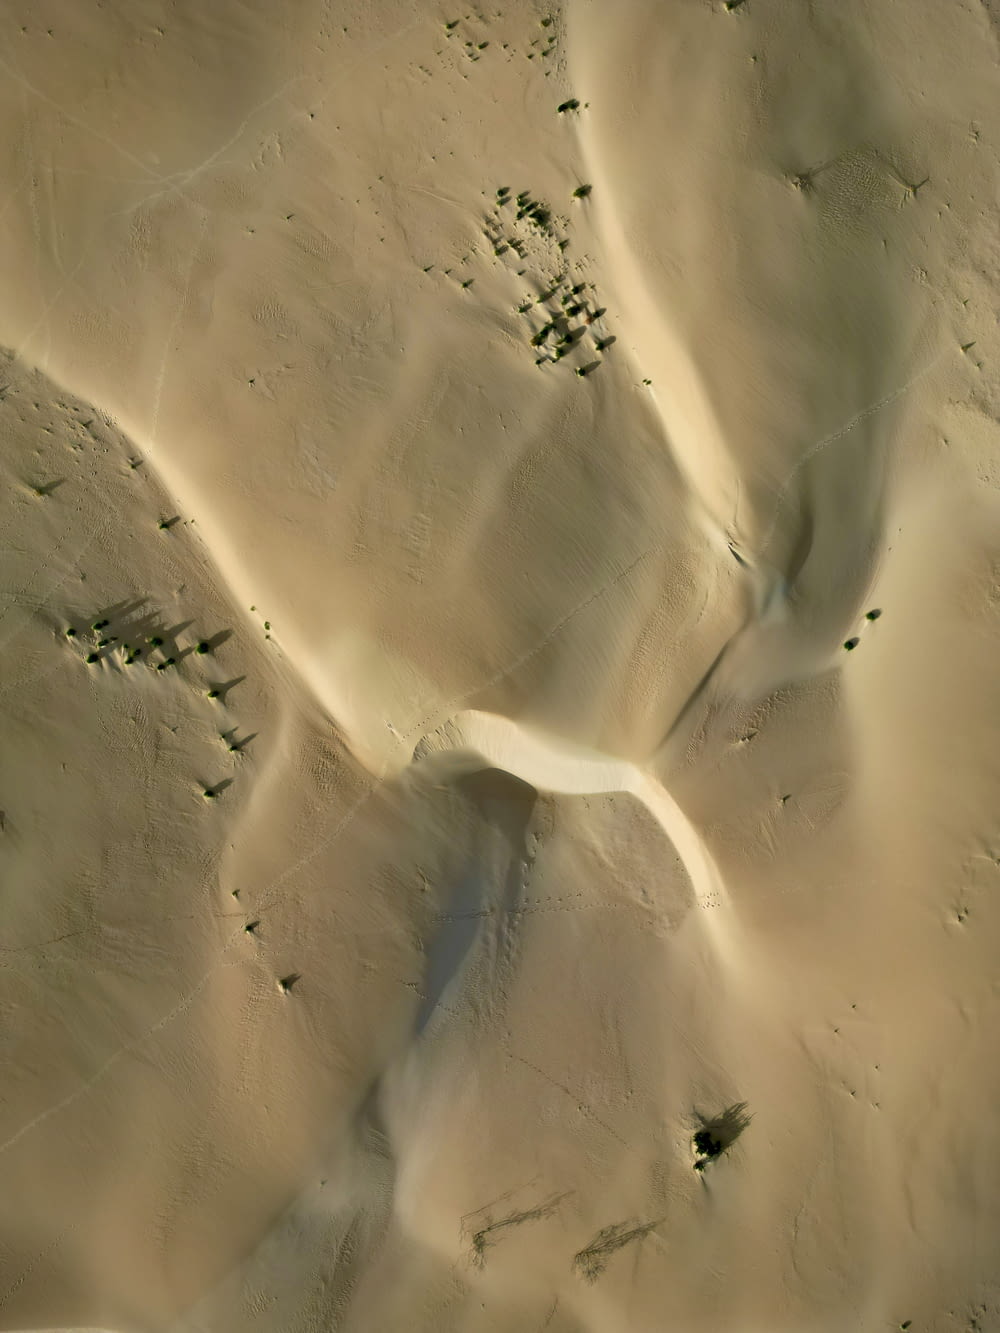 an aerial view of a desert with sand dunes